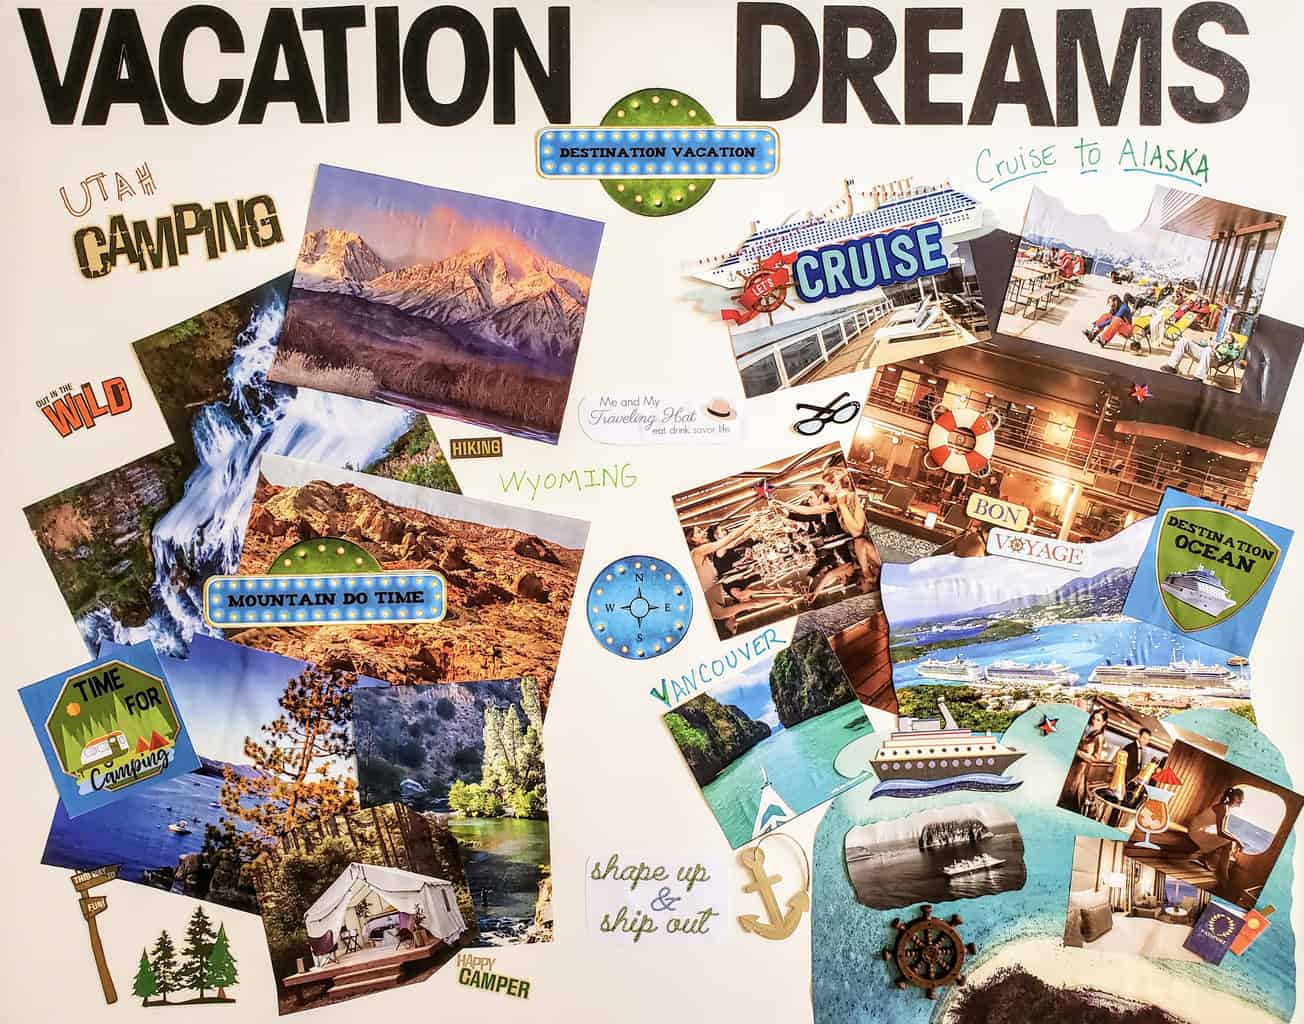 travel vision board pictures